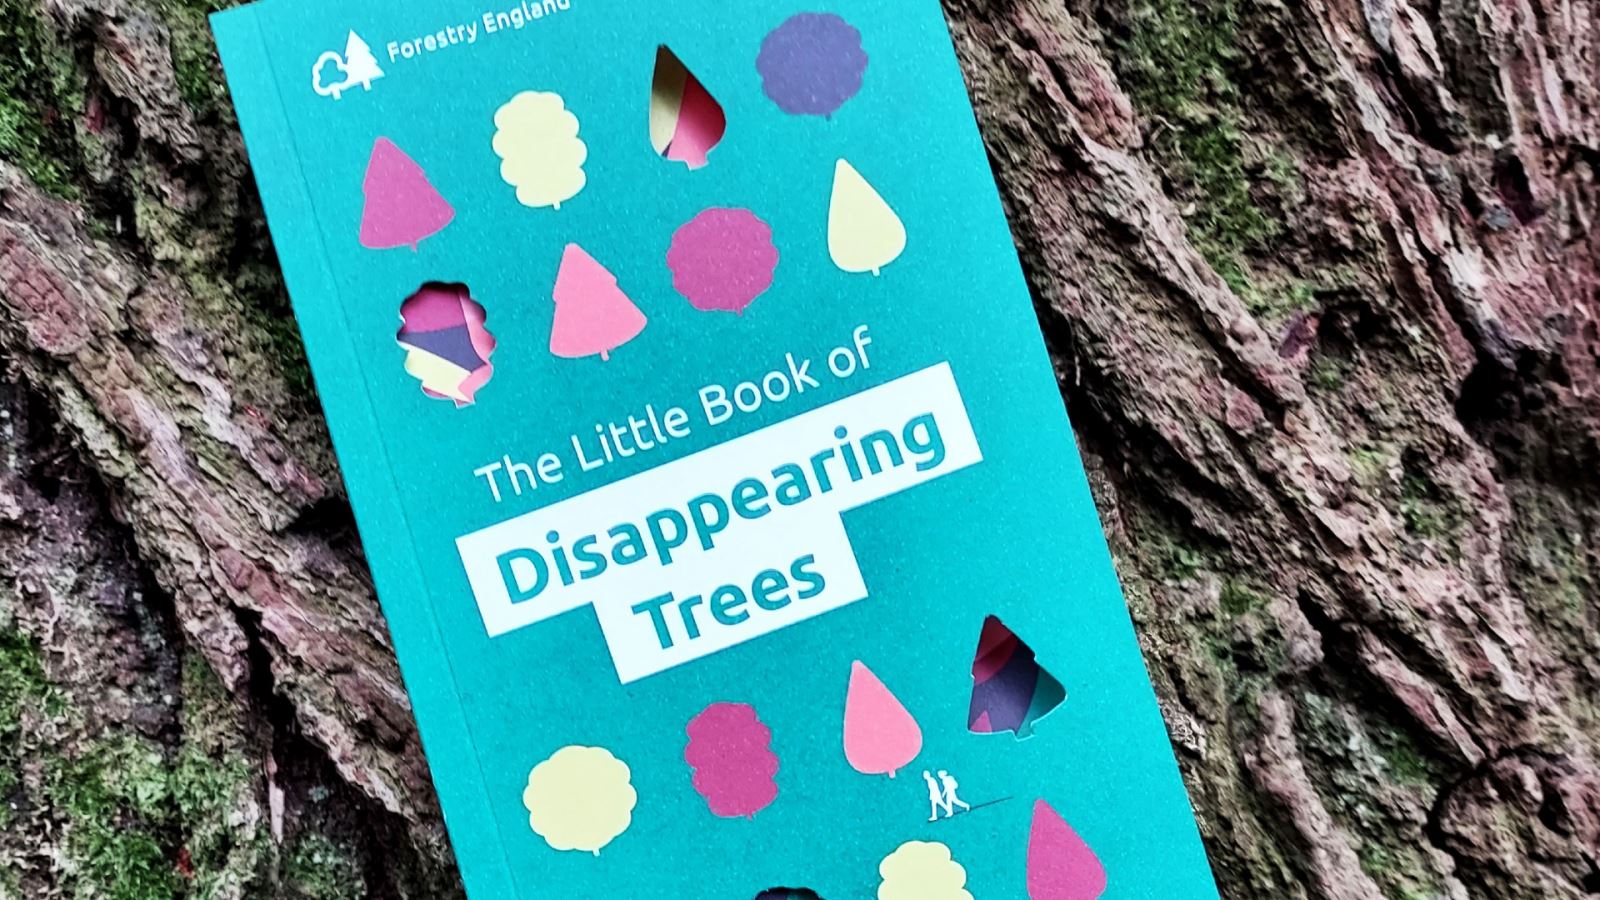 Little Book of Disappearing Trees